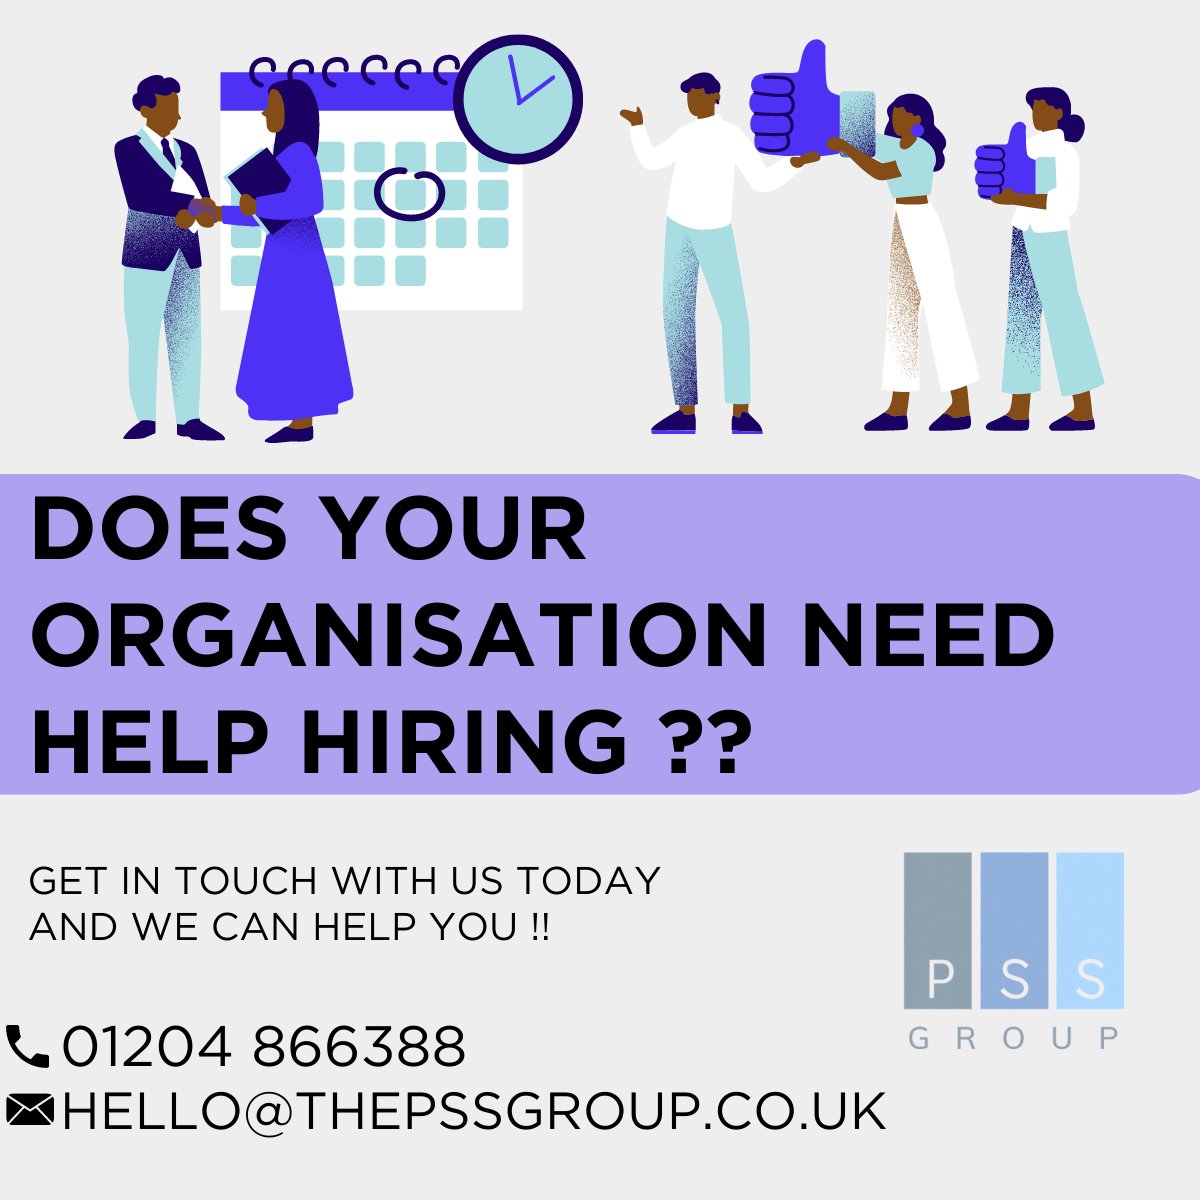 🌟✨🔎 Does your organization need help with hiring? Look no further! PSS is here to assist you! 💼💪✅

🌐 thepssgroup.co.uk
☎️ 01204 866388
✉️ hello@thepssgroup.co.uk

#RecruitmentServices #HiringAssistance #TopTalent #PSS #TransformYourHiring #VisitOurWebsite